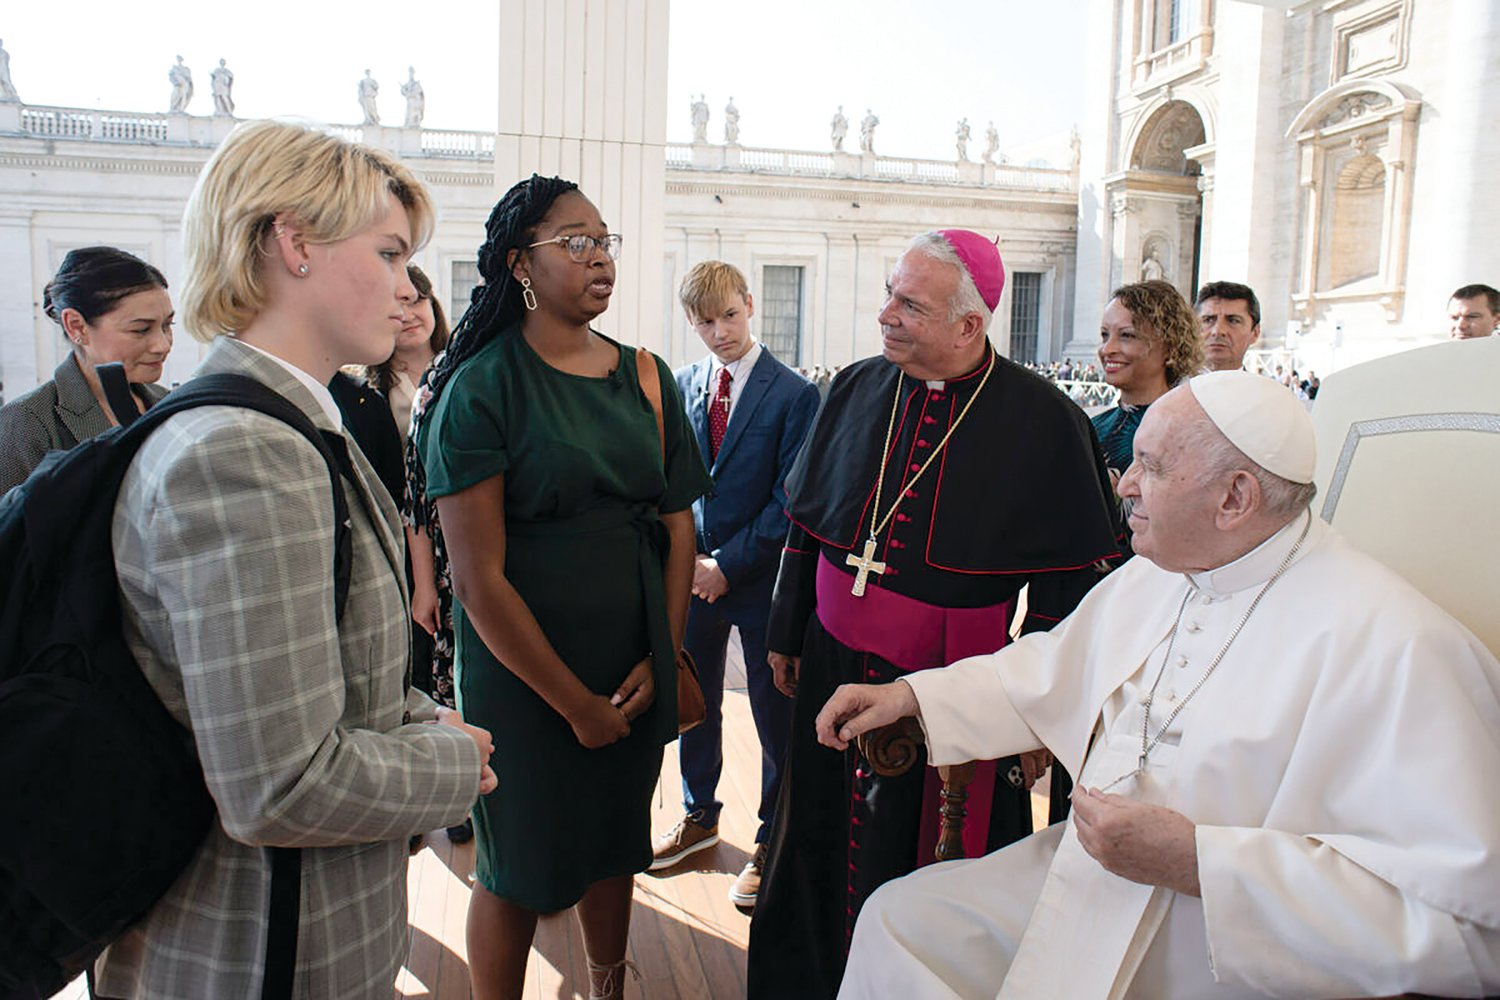 Olivia Marcoux, at left, a parishioner of Holy Trinity Church and a student at Mount Saint Charles Academy, was one of two selected to deliver a message about the concerns of youth in the United States in a face-to-face visit with Pope Francis on October 12 in Rome.